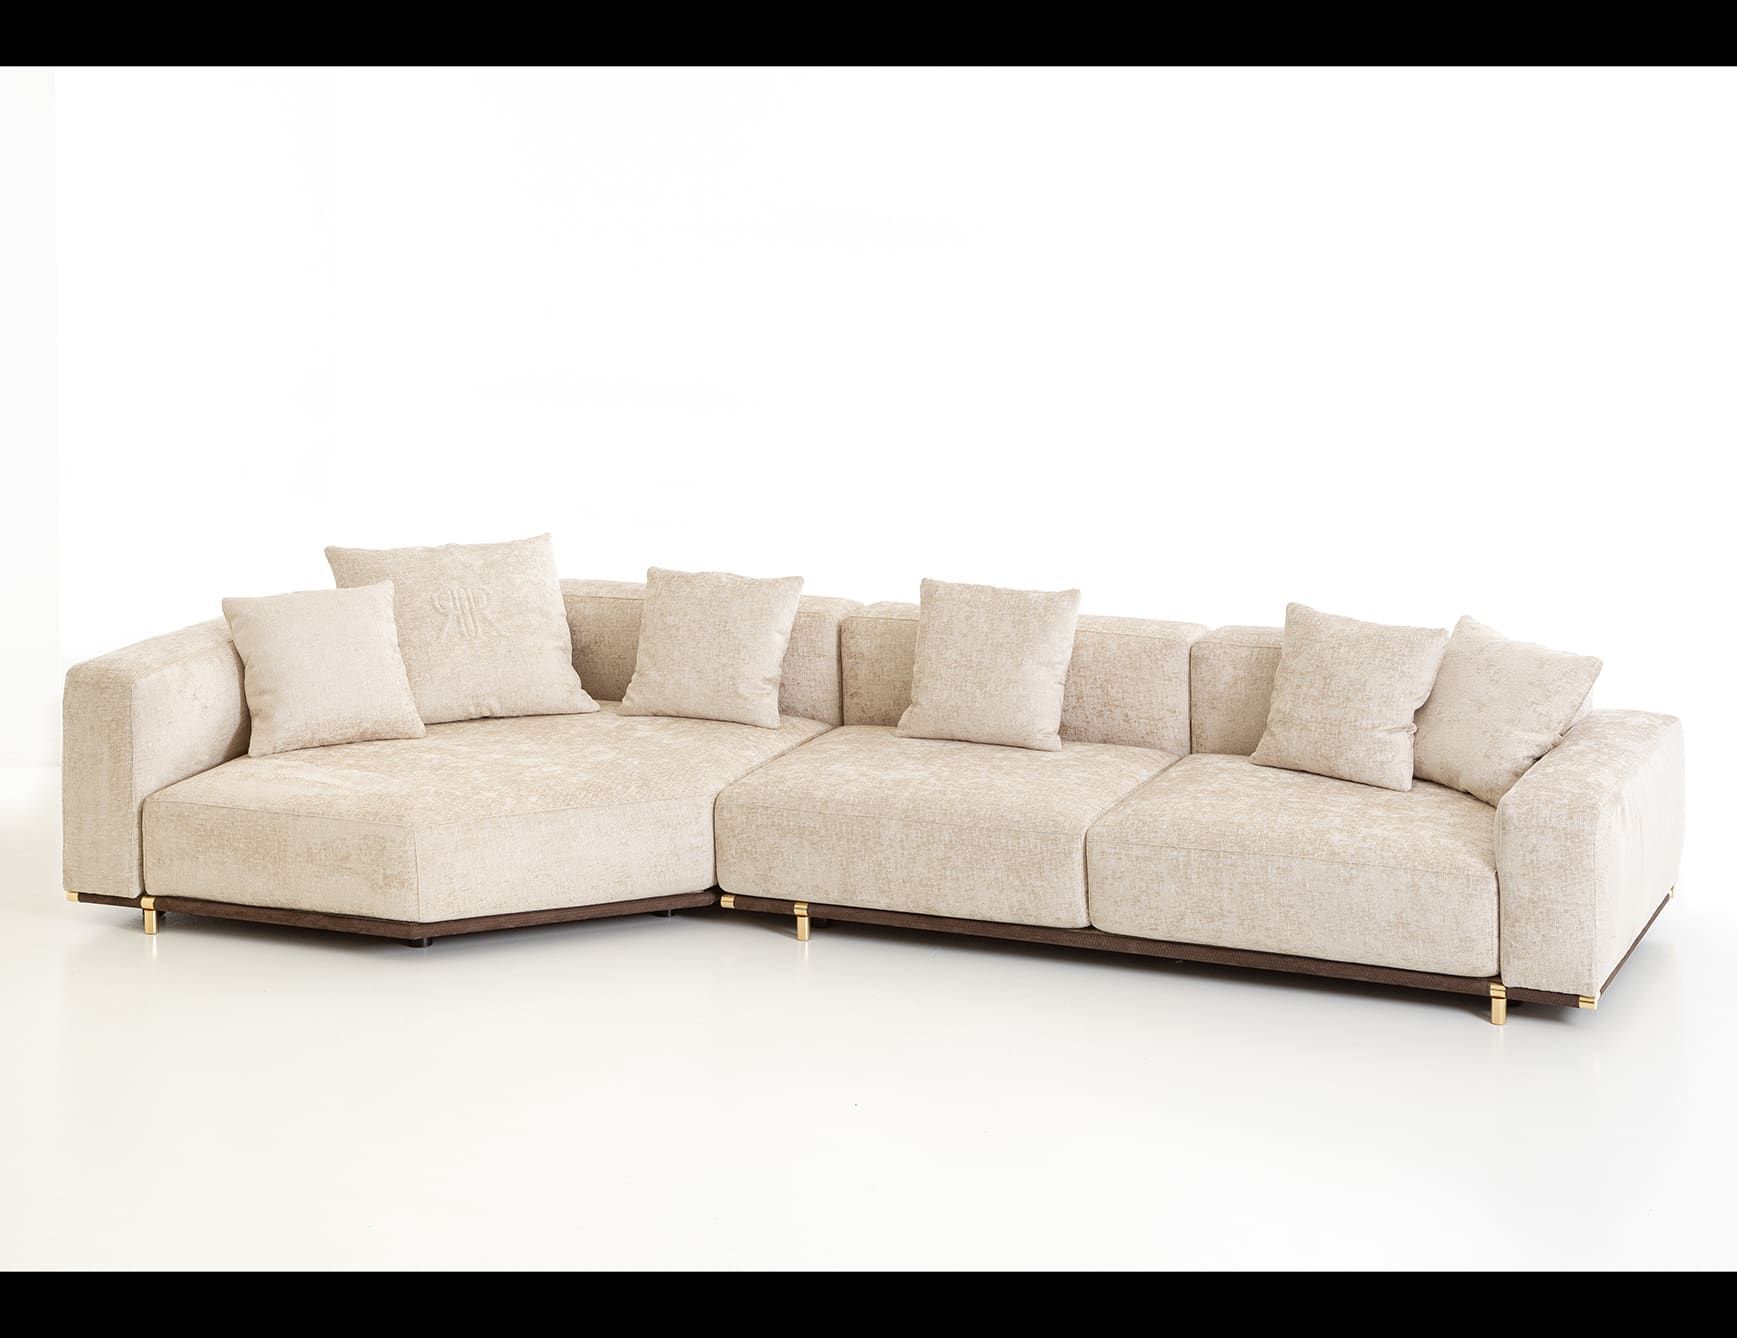 Boheme modern luxury sectional with beige leather